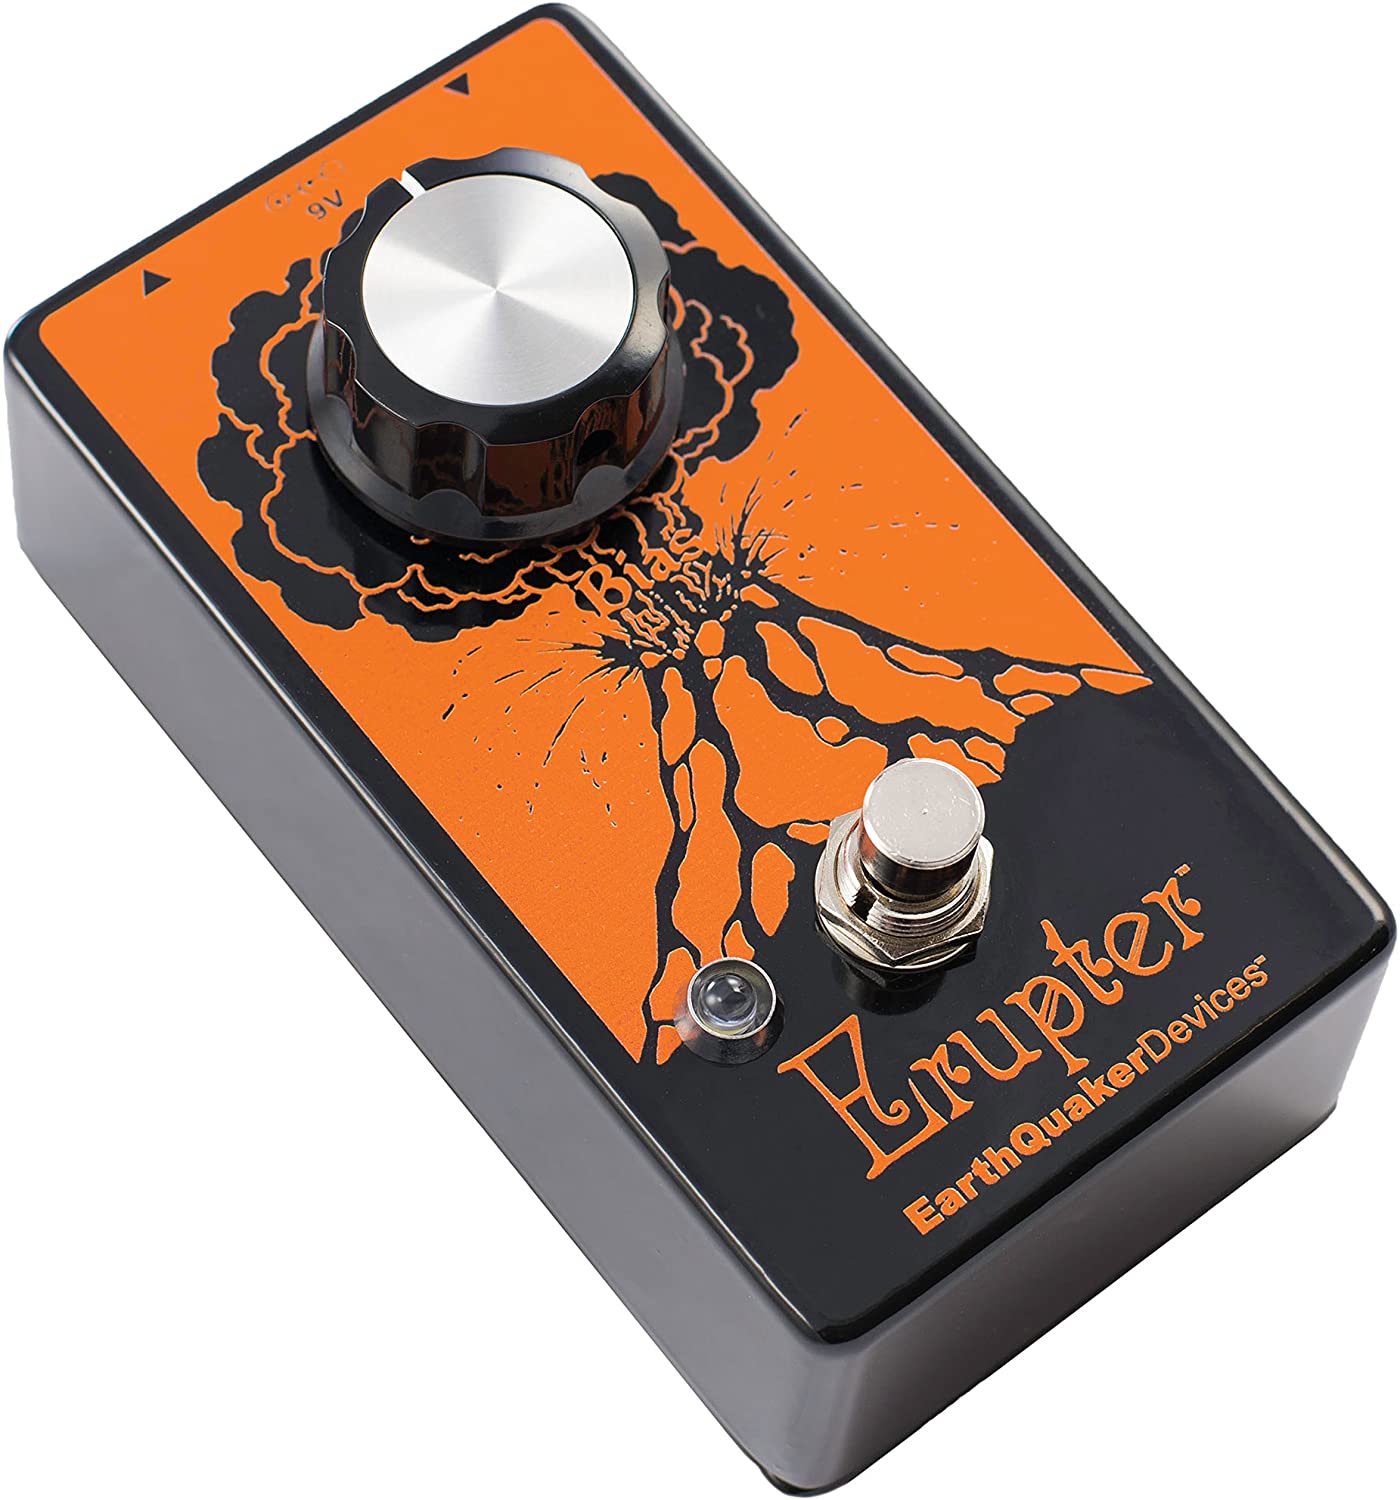 EarthQuaker Devices Erupter Ultimate Fuzz Tone Guitar Effects Pedal